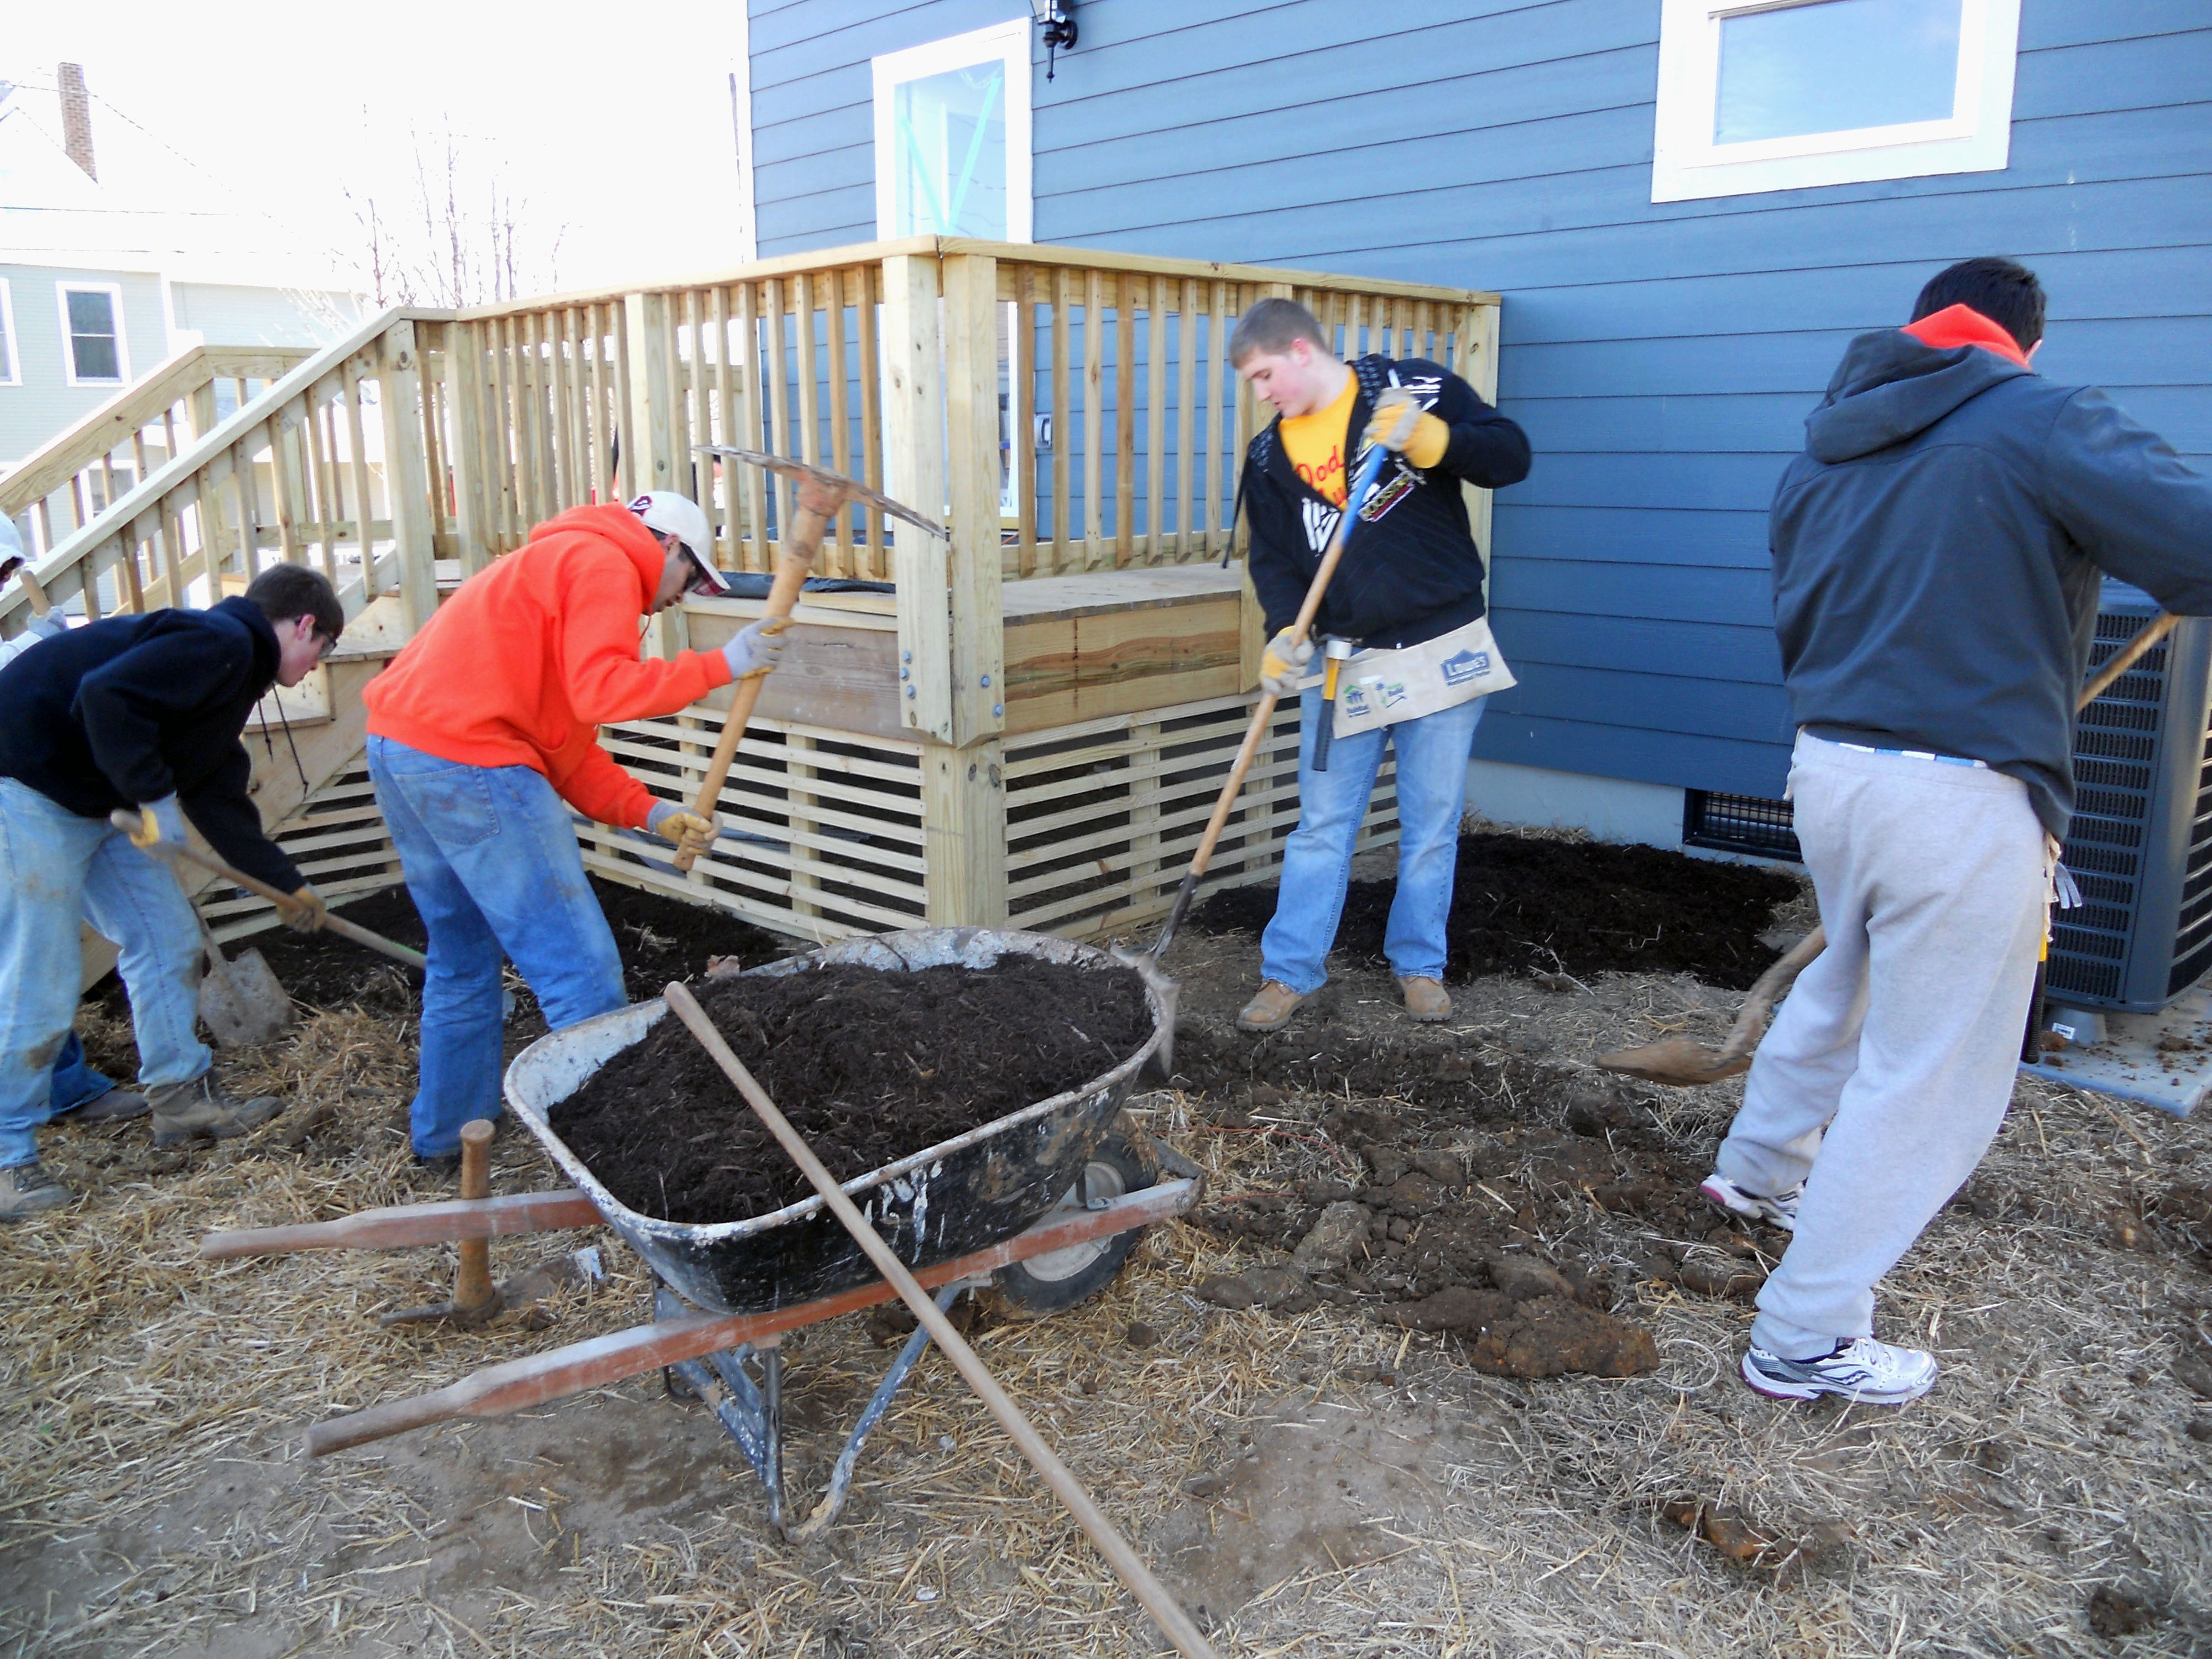 Students landscaping in the garden of a Habitat for Humanity house